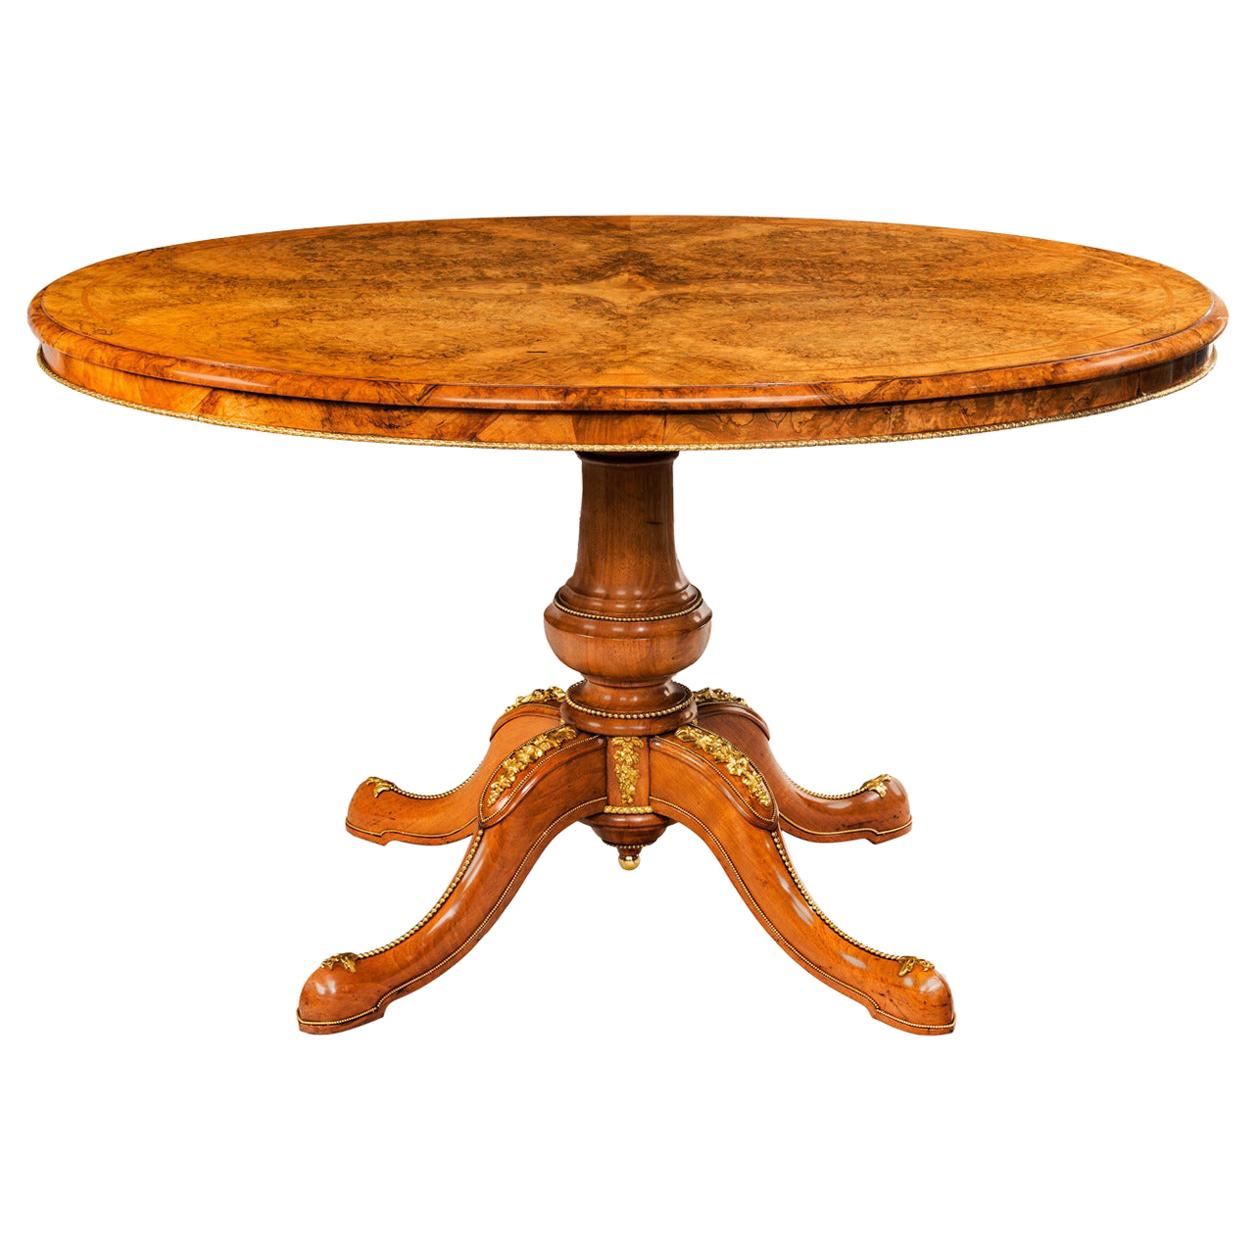 Burr Walnut and Ormolu-Mounted Centre Table with Superb Quartered Veneered Top